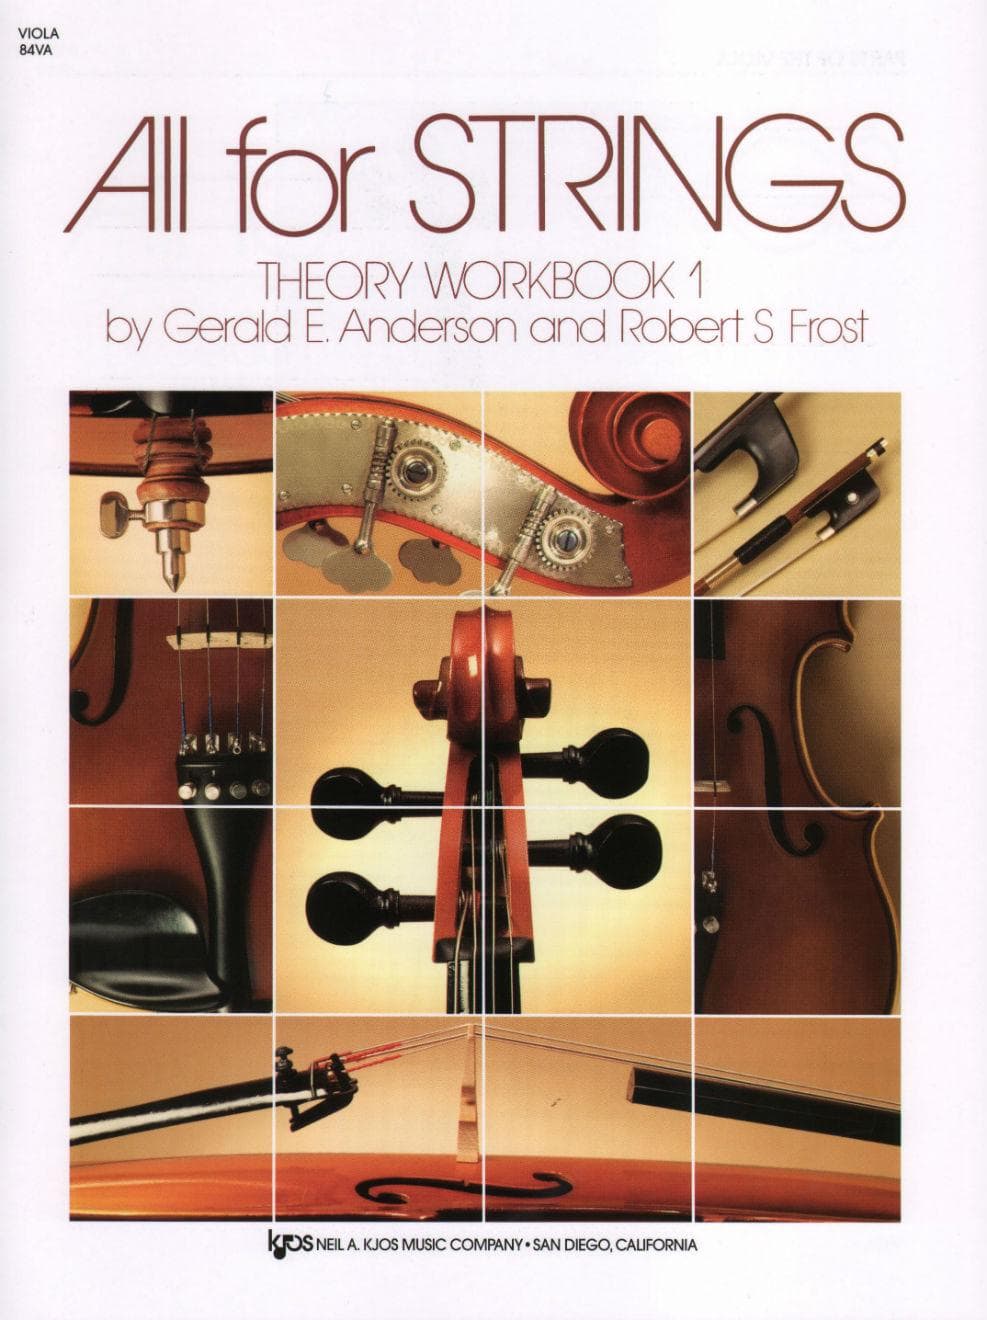 All For Strings - Theory Workbook 1 for Viola by Gerald E Anderson and Robert S Frost